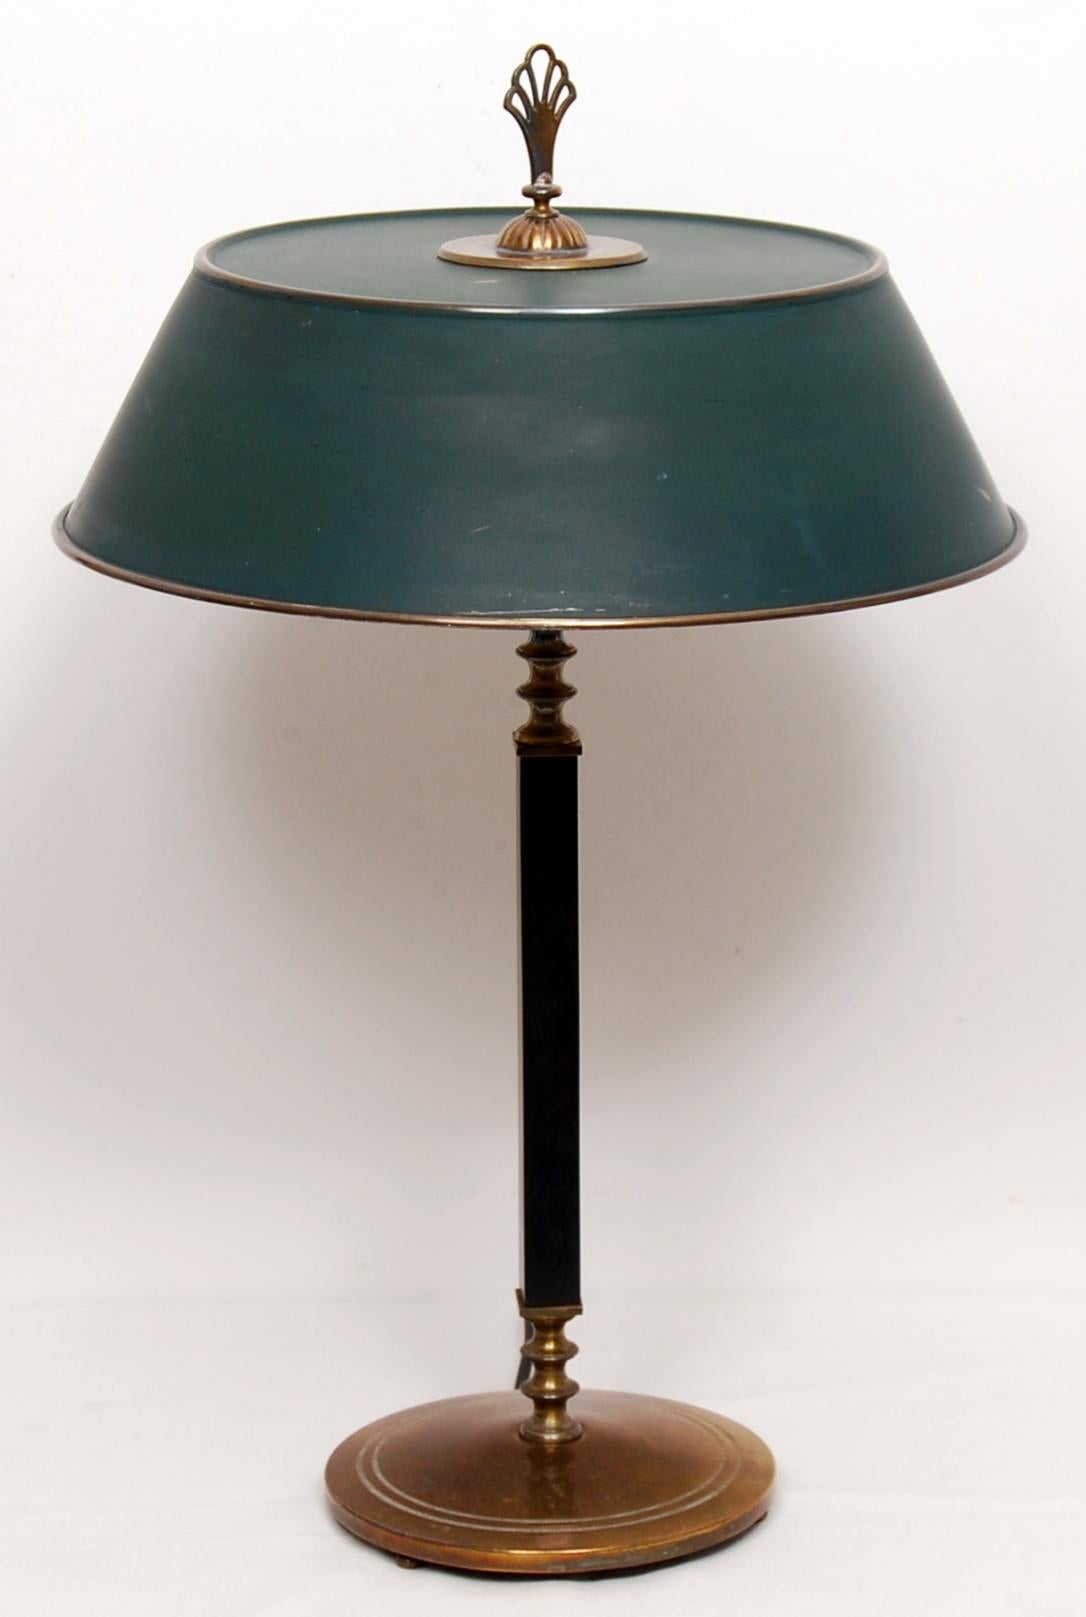 A desk / table lamp by Böhlmarks, Stockholm Sweden, designed in 1928. Patinated brass and black lacquered wood steem with a British racing green lacquered metal plate shade. Marked 6942 underneath.

 